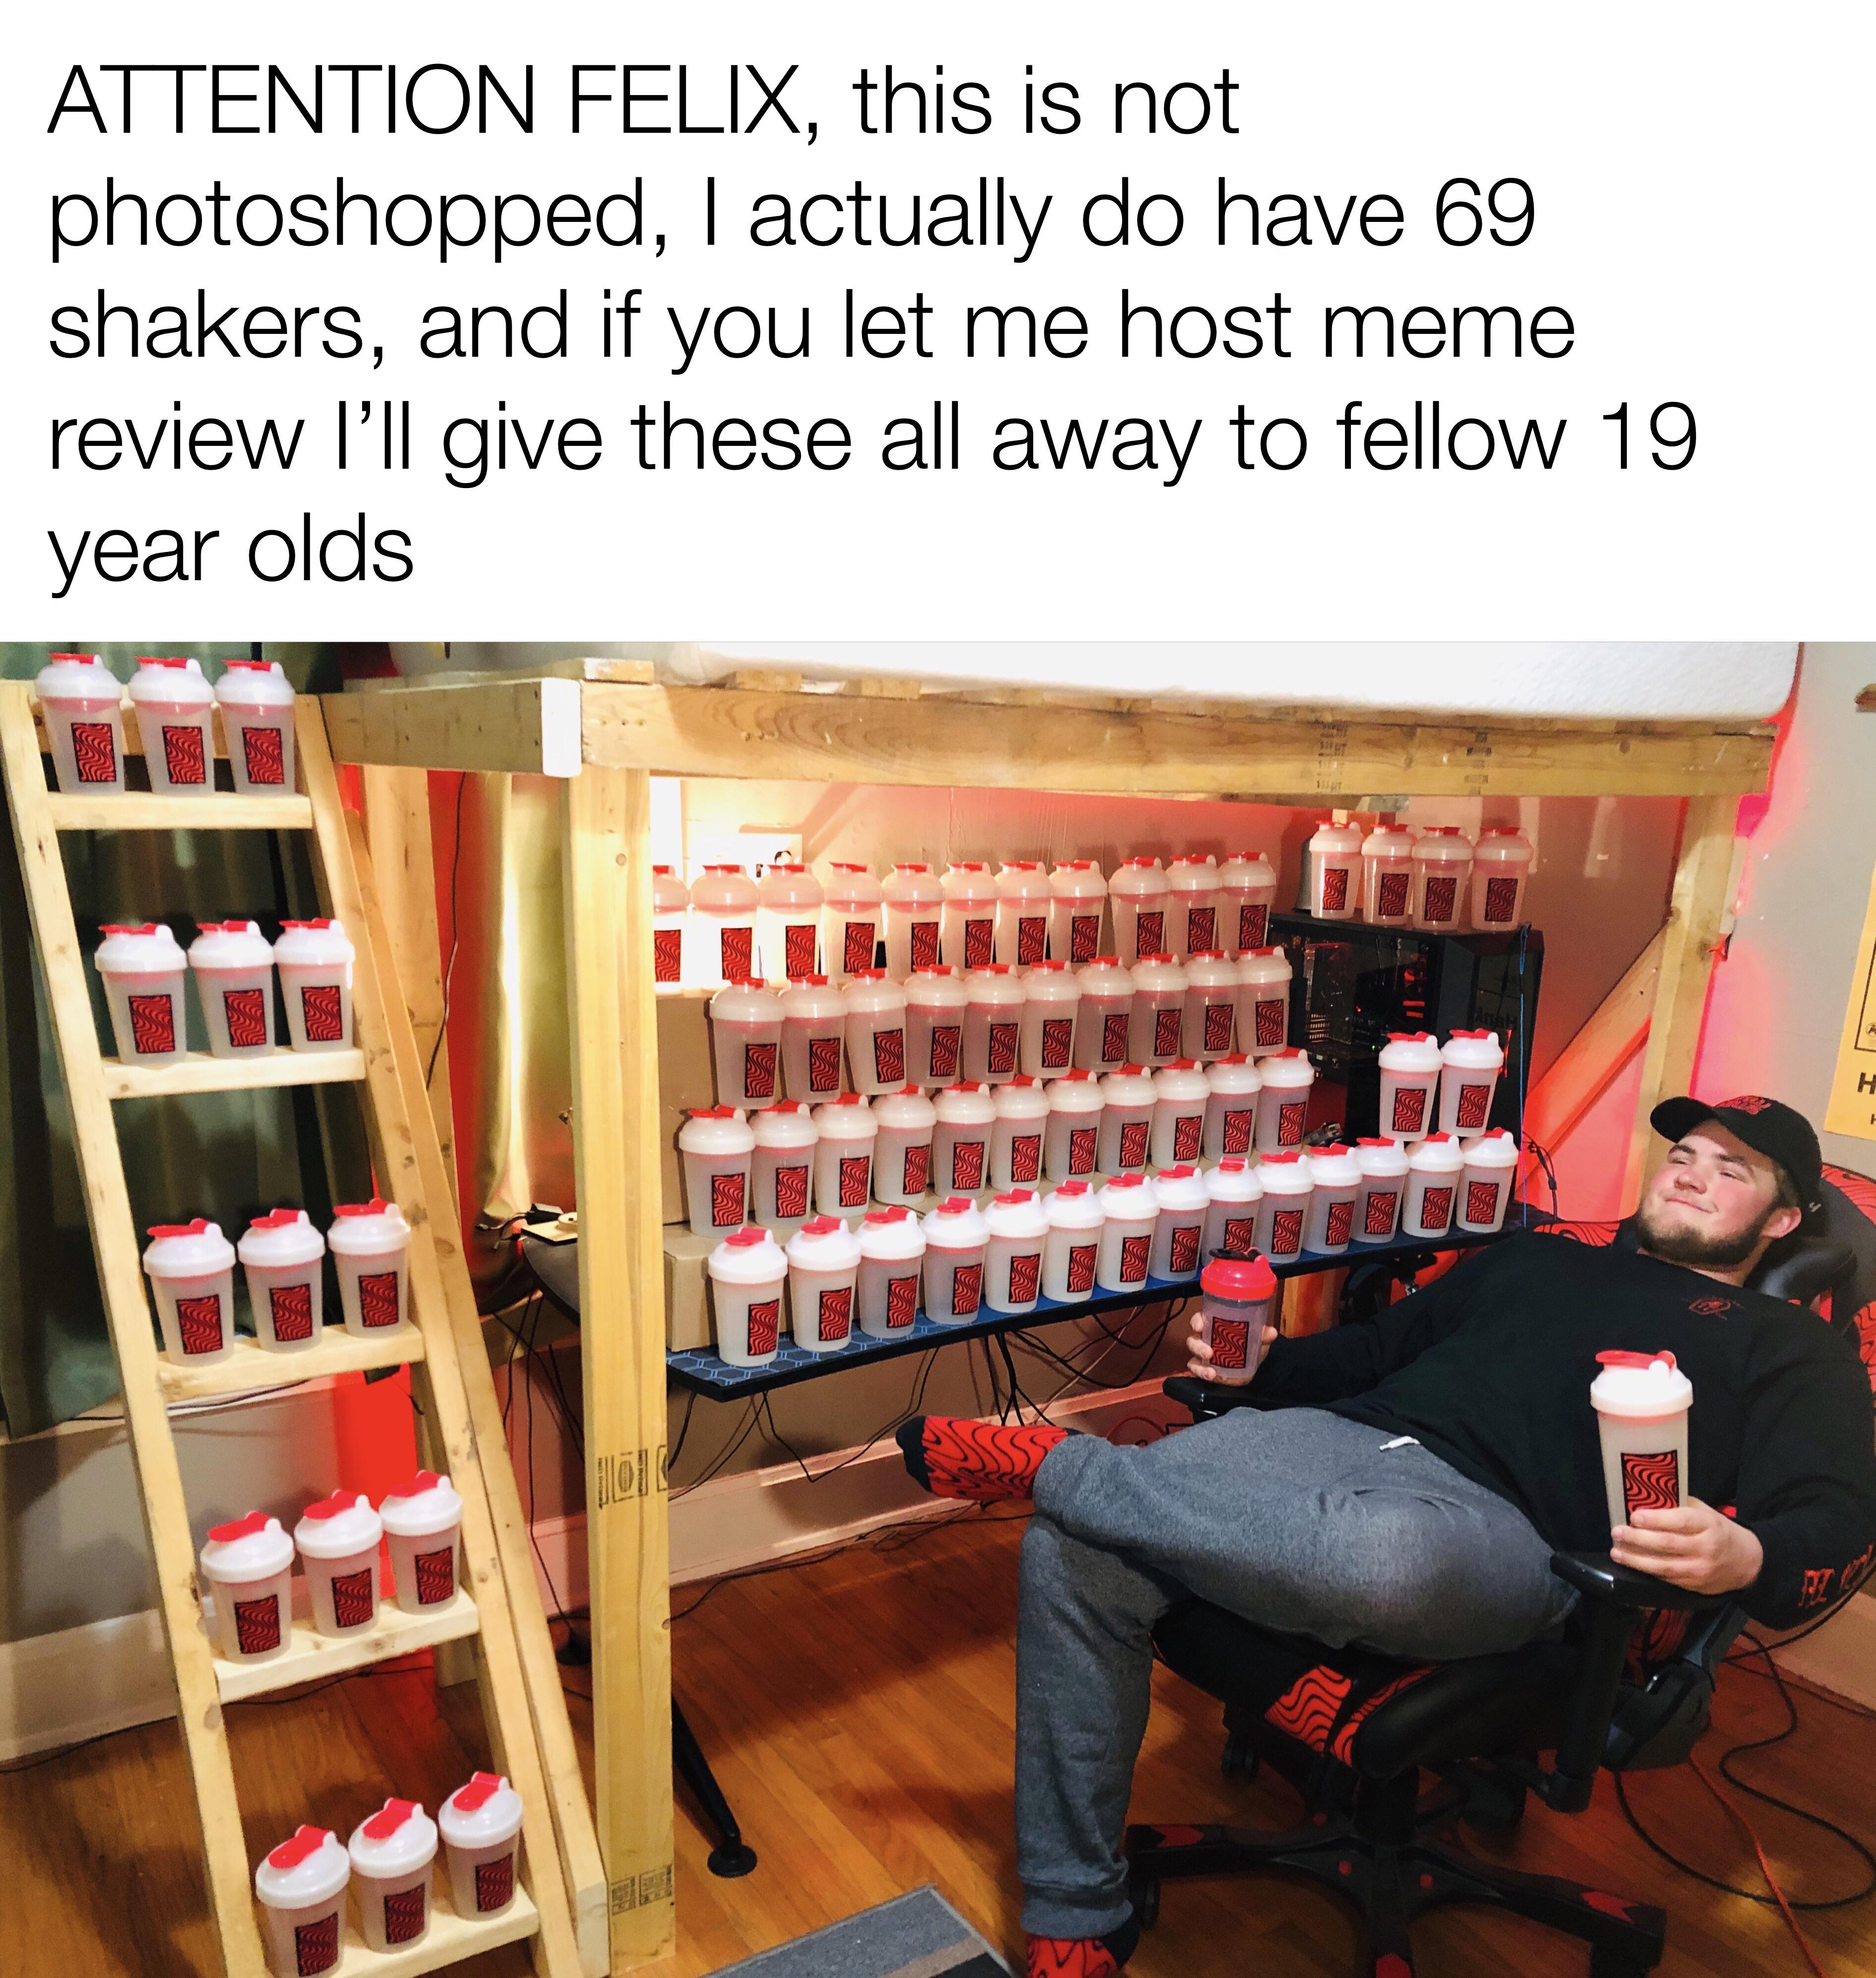 room - Attention Felix, this is not photoshopped, I actually do have 69 shakers, and if you let me host meme review I'll give these all away to fellow 19 year olds Elleruz